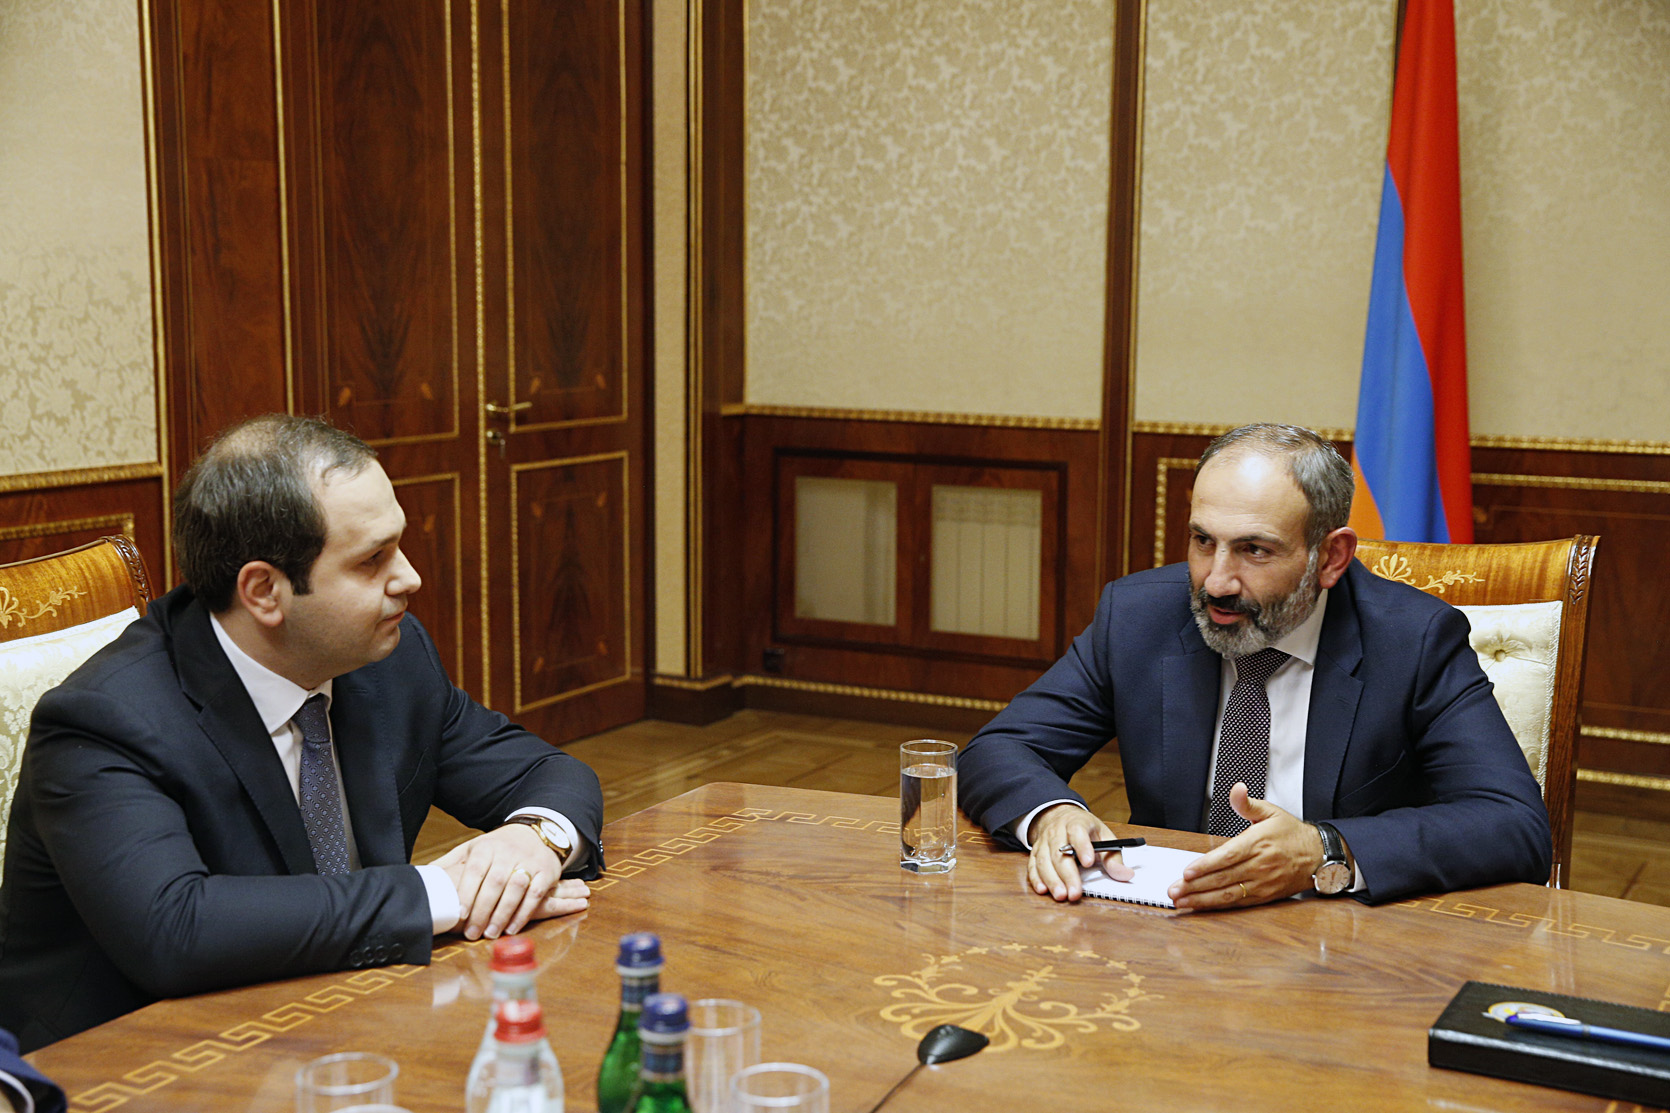 Georgy Kutoyan reports to Prime Minister Pashinyan on security situation in Armenia